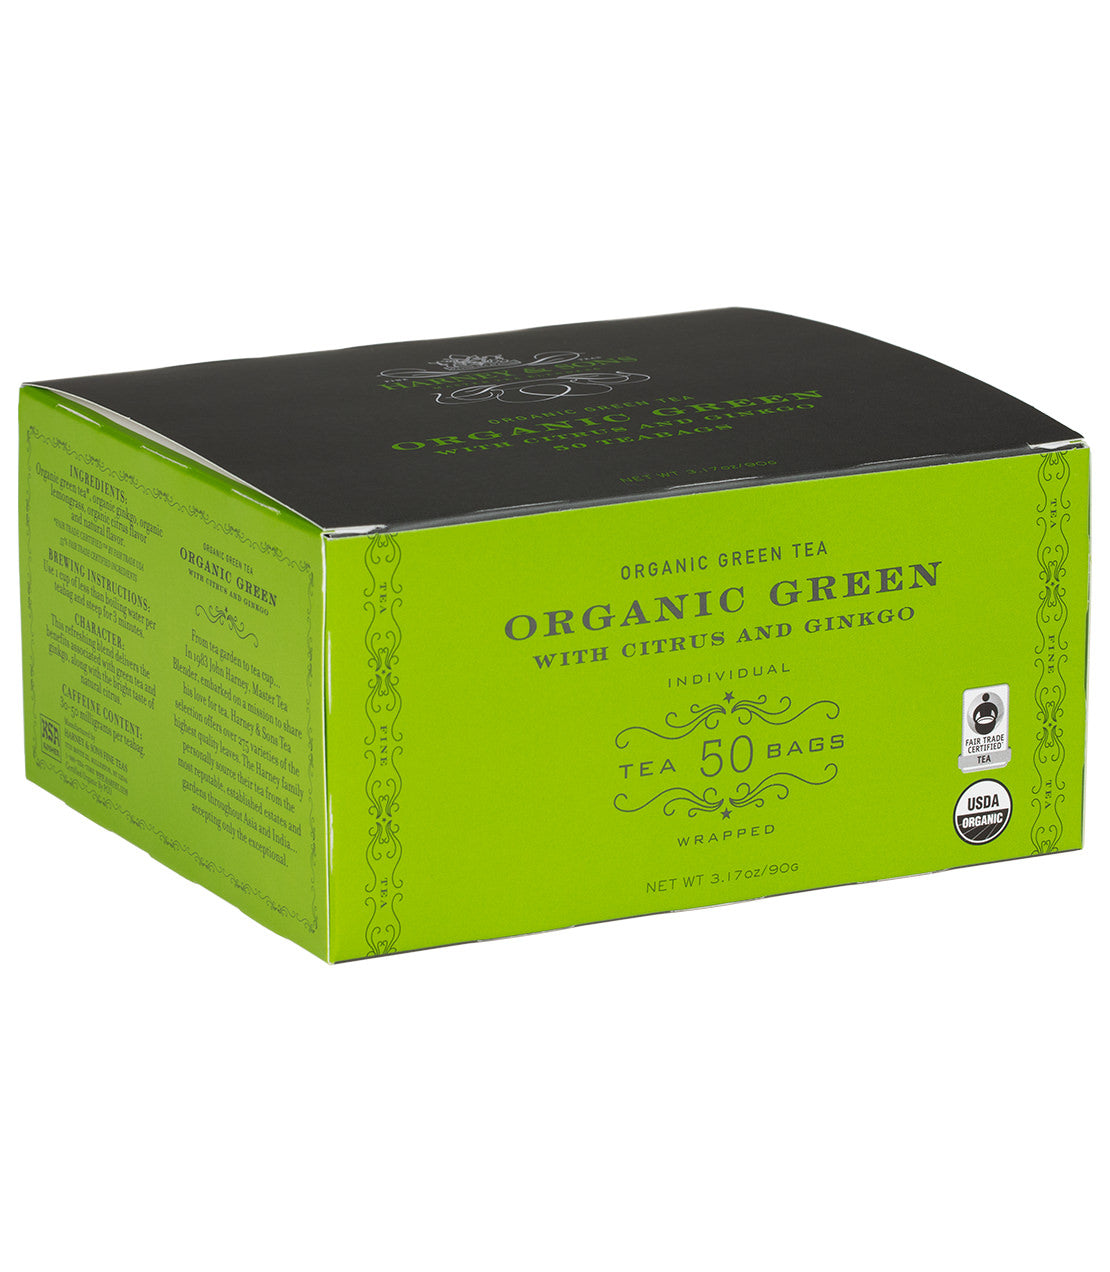 Organic Green with Citrus & Ginkgo, Box of 50 Foil Wrapped Teabags - Teabags Box of 50 Foil Wrapped Teabags - Harney & Sons Fine Teas